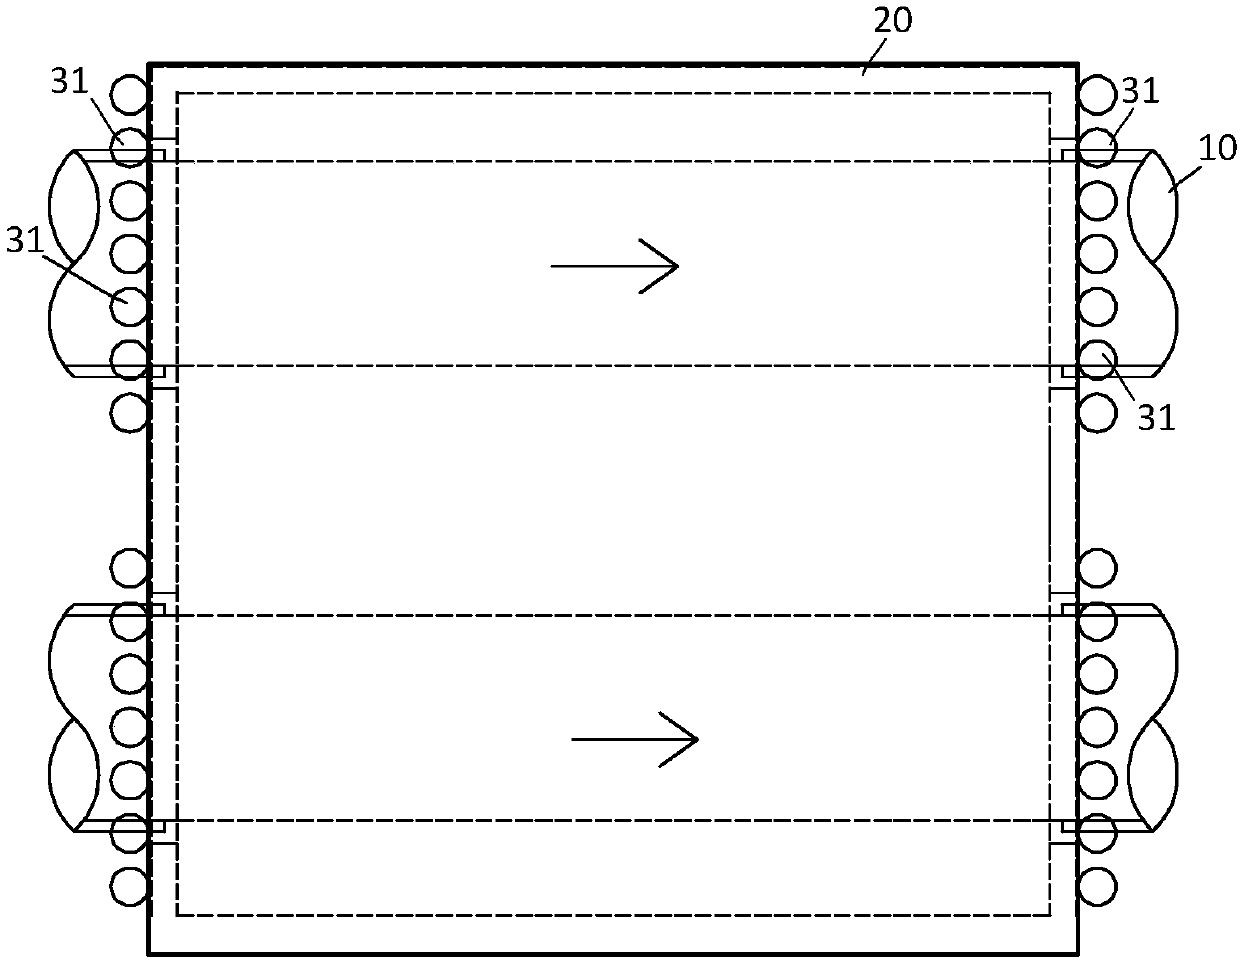 Construction method of pipe gallery by shielding before well arrangement